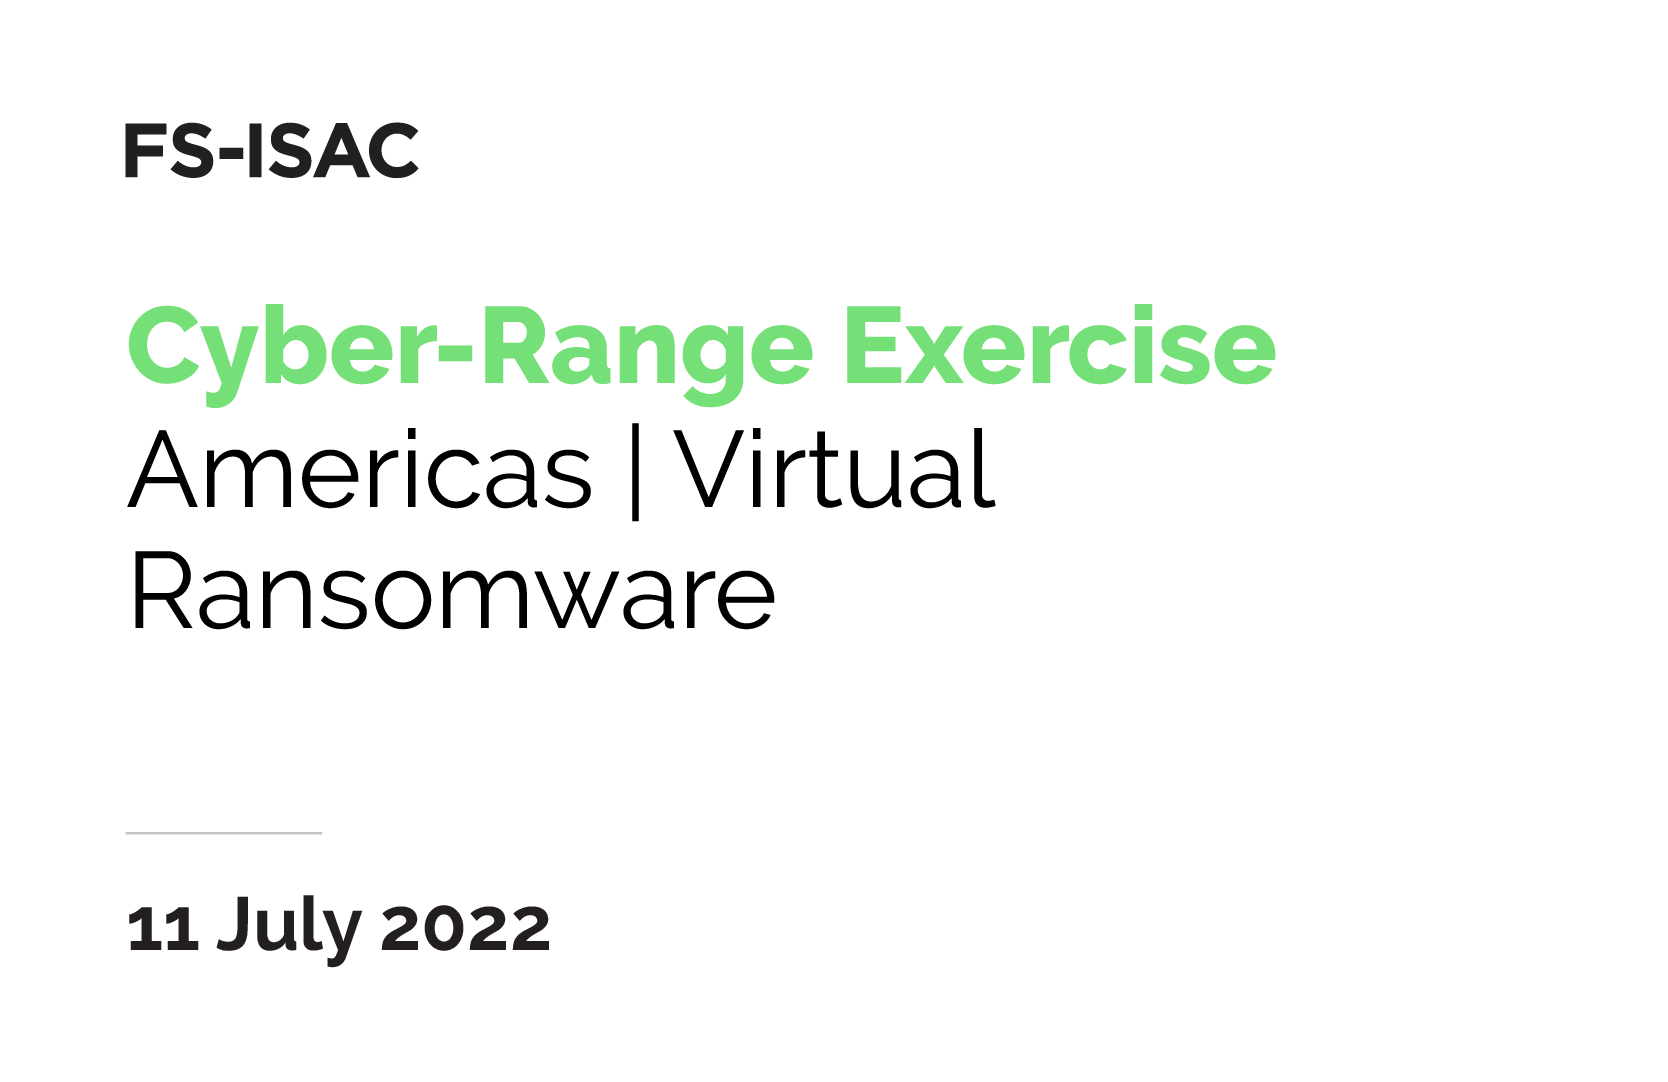 FS-ISAC Cyber Range Exercise | Ransomware Americas | July 2022